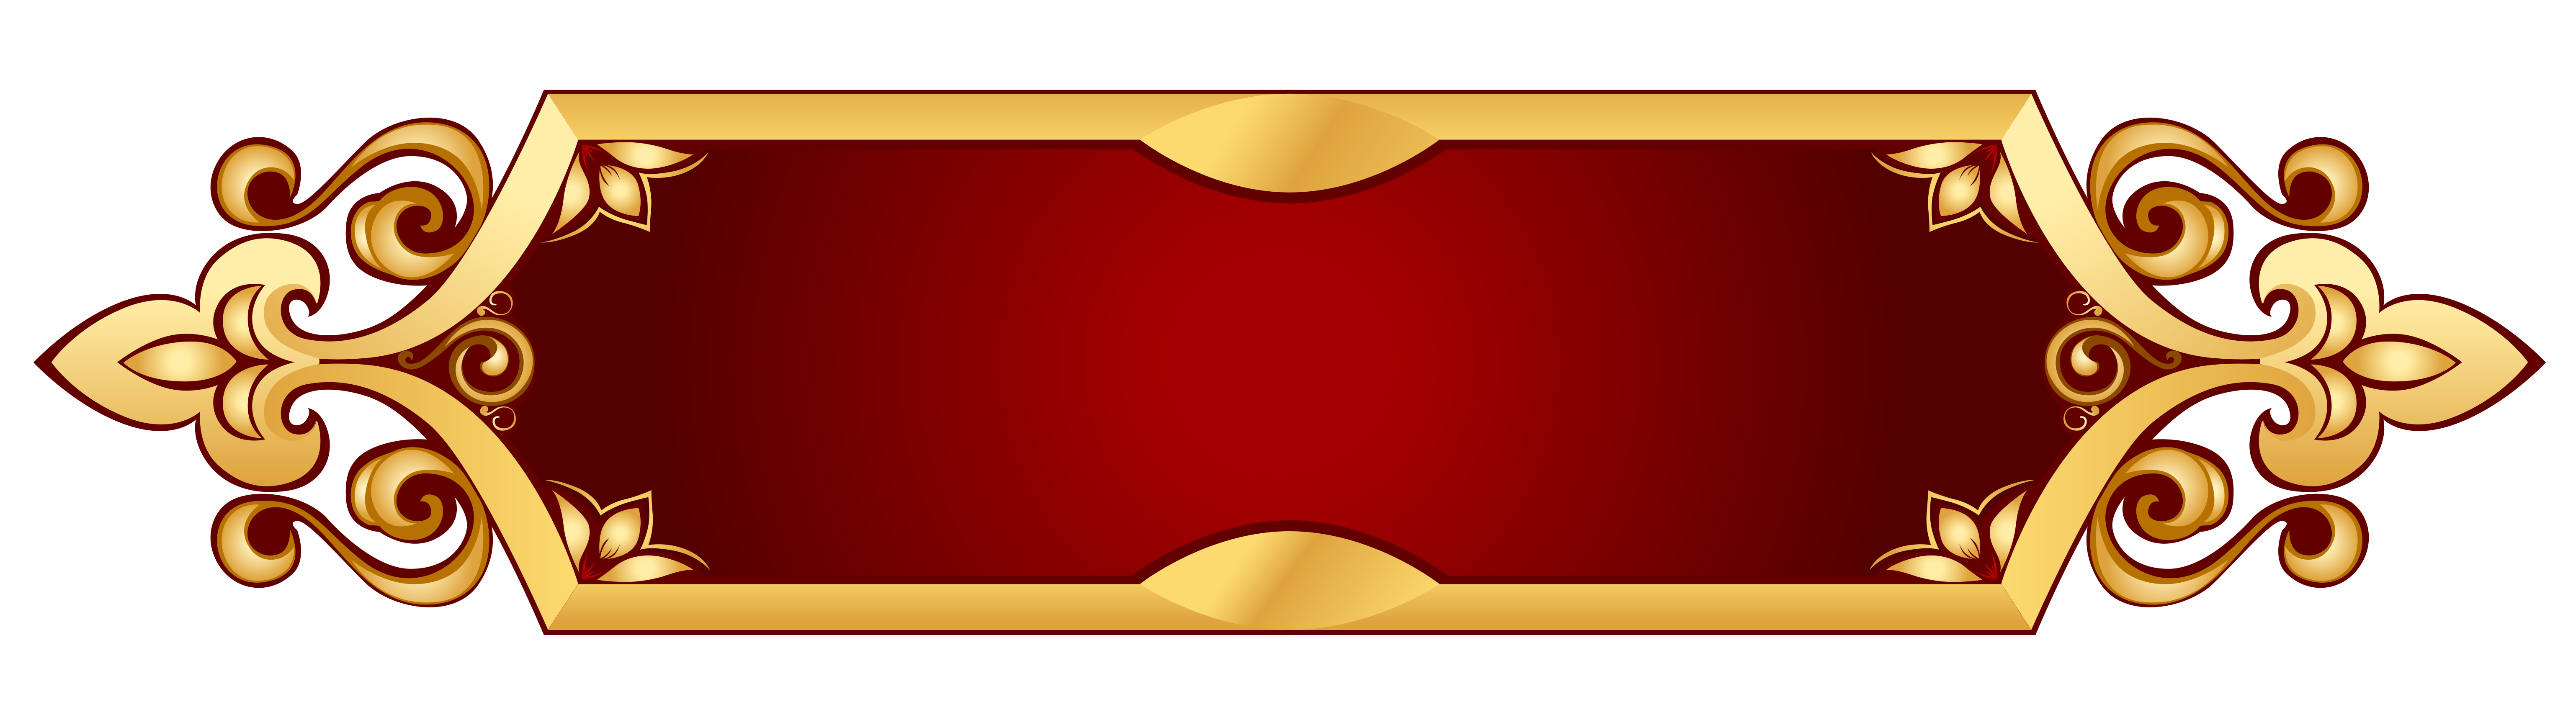 Wing clipart banner. Decorative transparent png picture